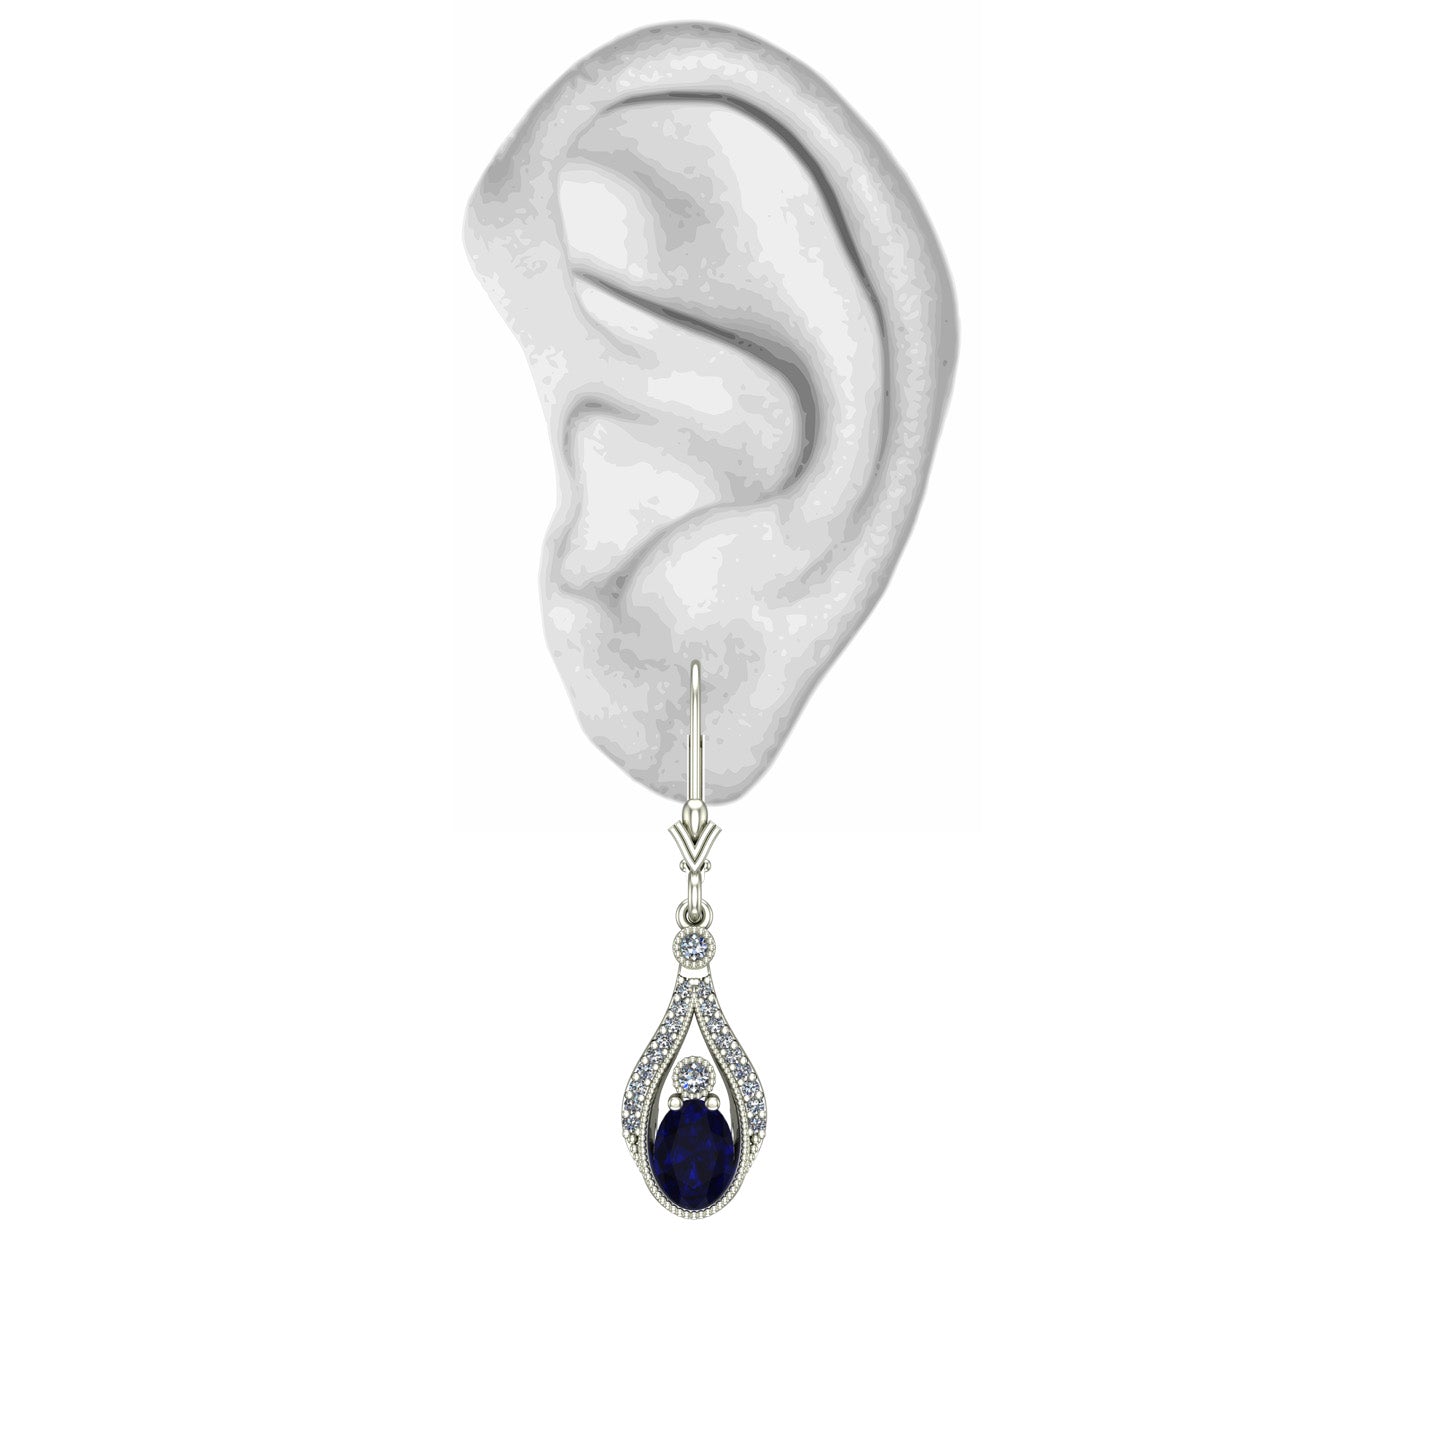 oval blue sapphire and diamond drop earrings in 14k white gold - Charles Babb Designs - on ear